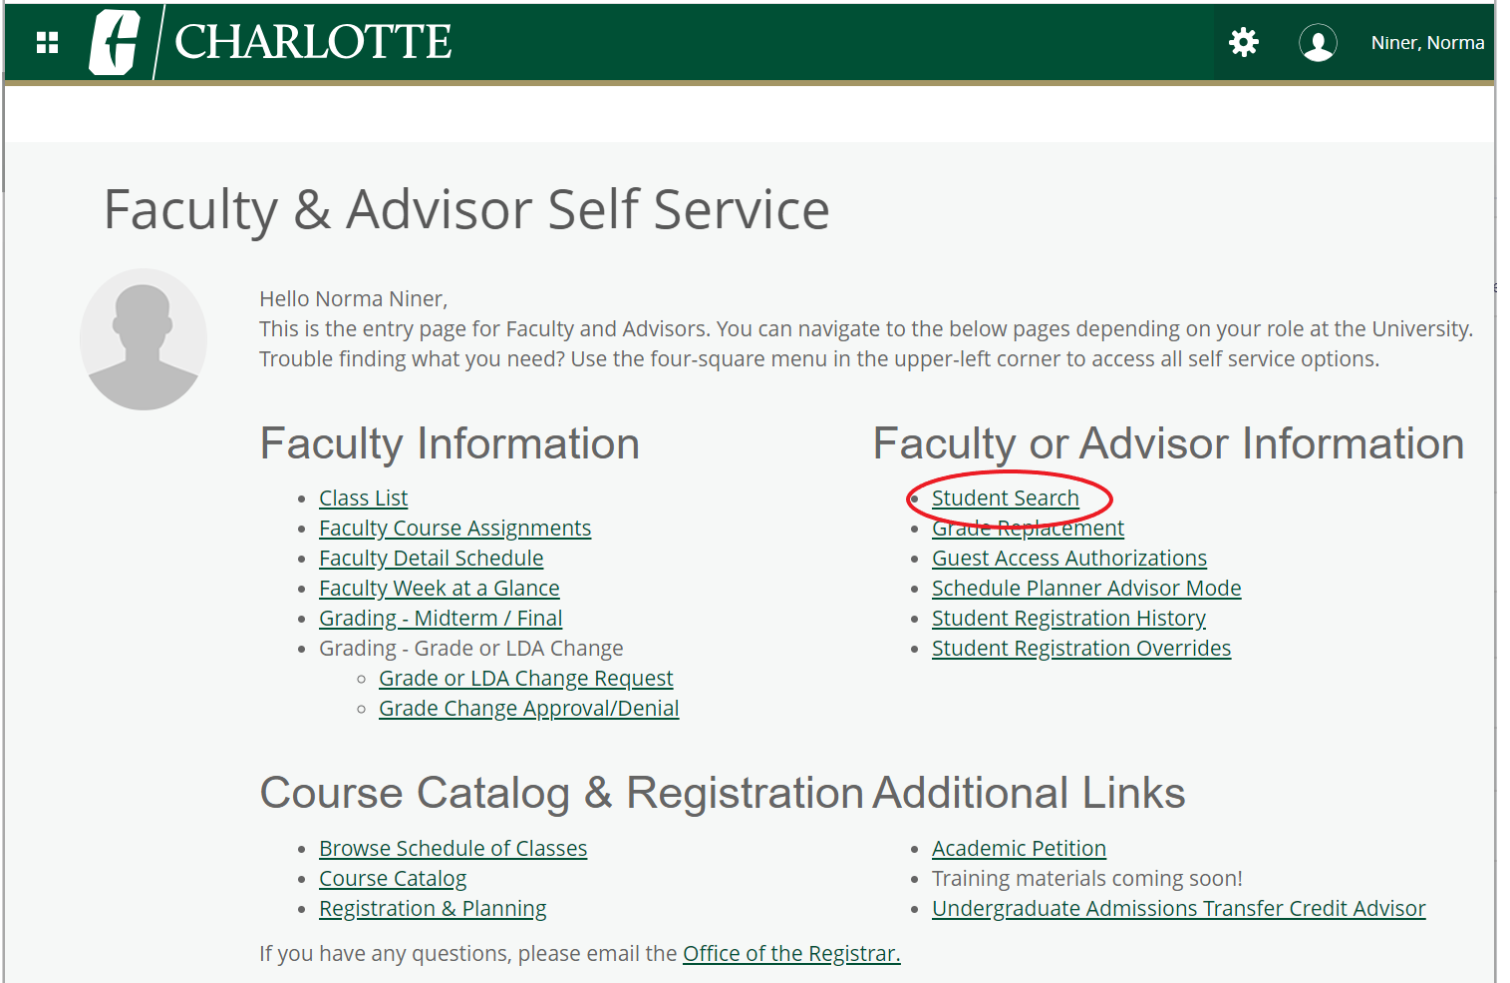 Student Search under Faculty or Advisor Information